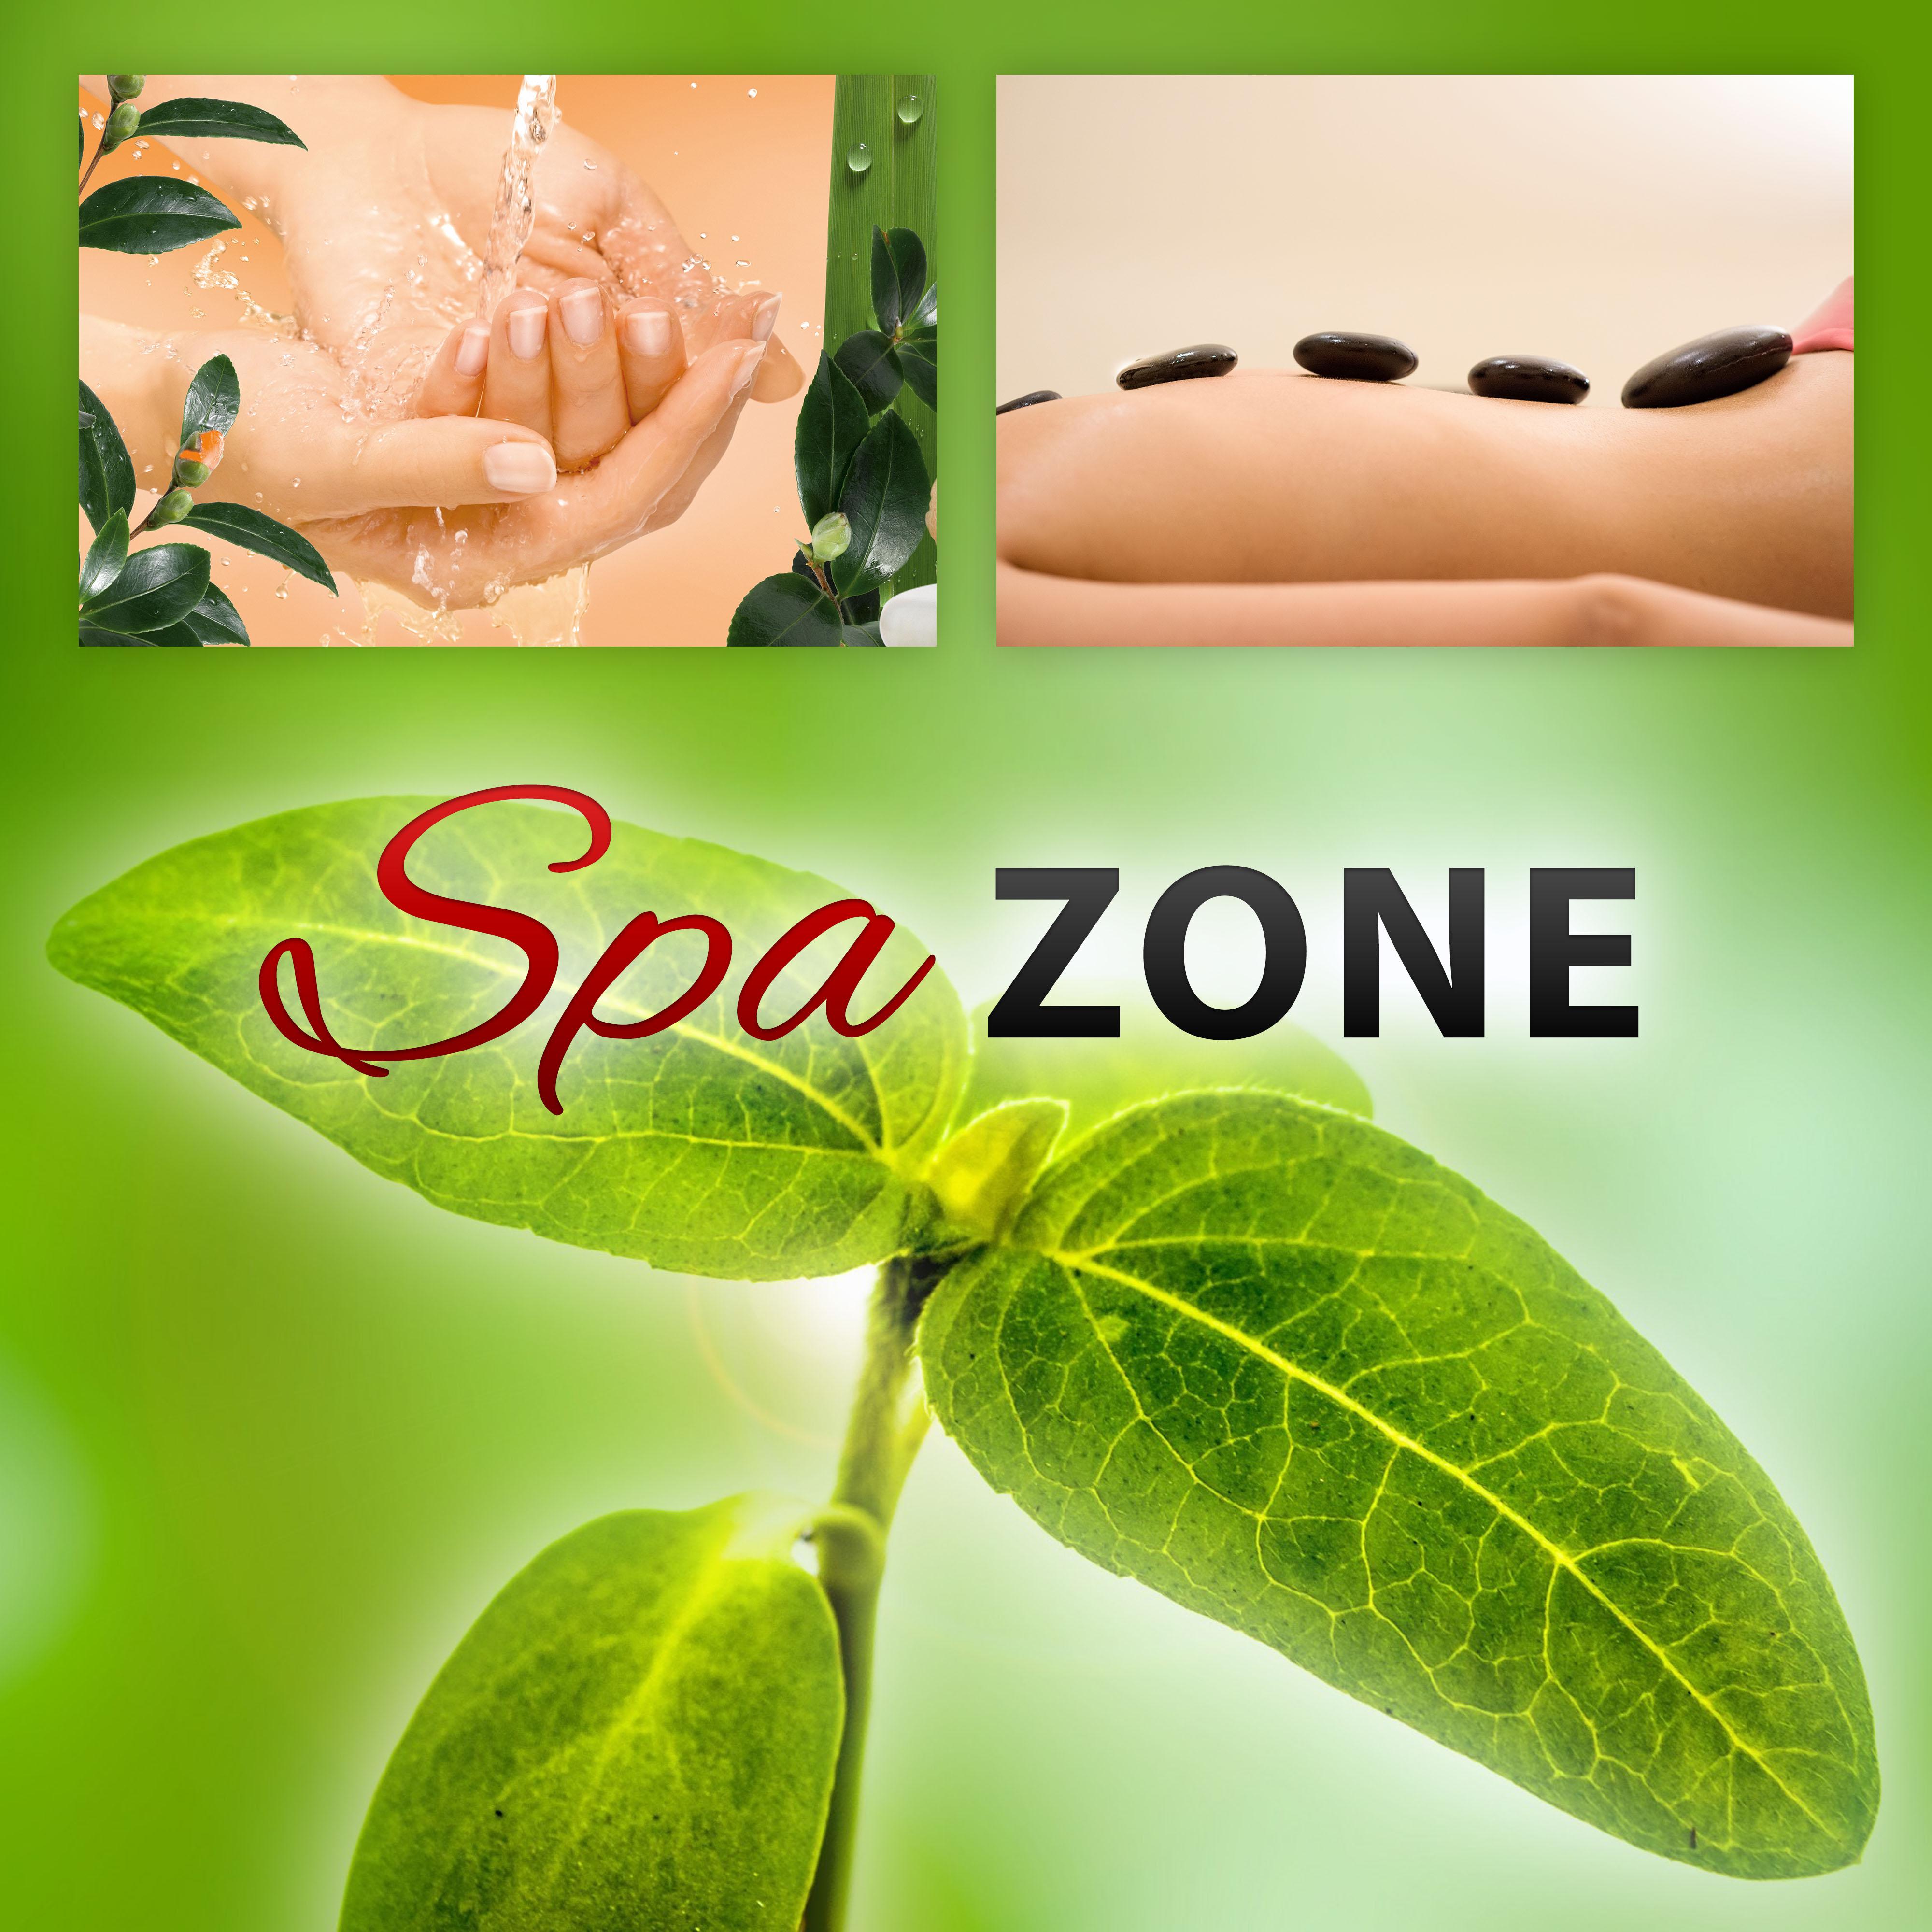 Spa Zone  Spa Music for Time to Relax in Spa Hotel, Healing Sounds of Nature for Deep Relaxing, Spa Massage Music, Spa Music